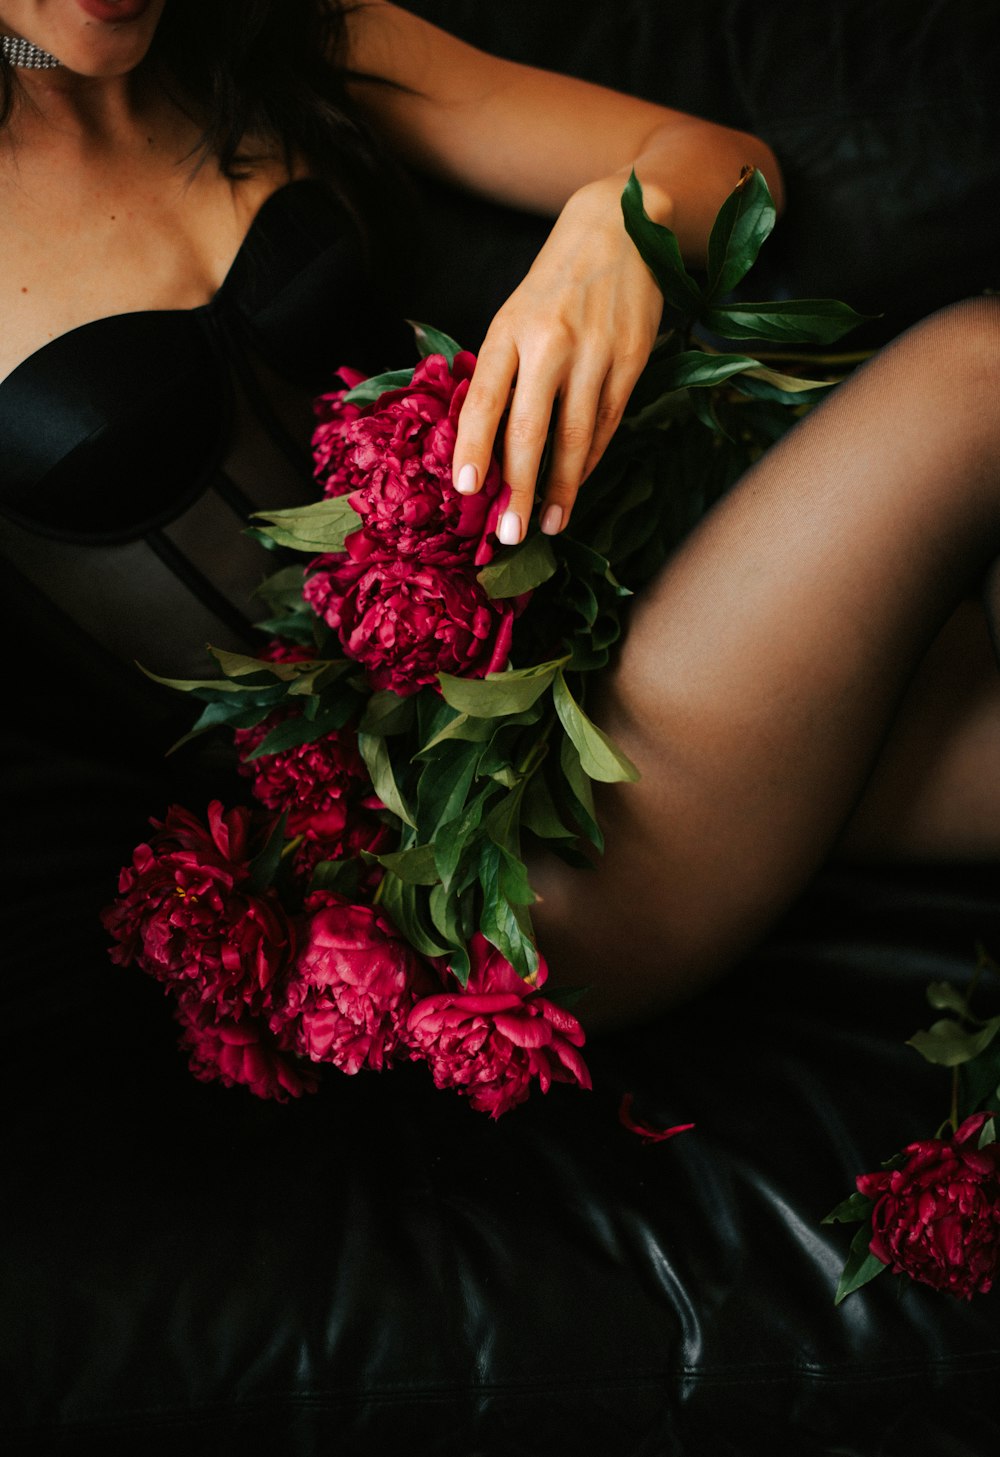 a woman in lingerie holding a bouquet of flowers